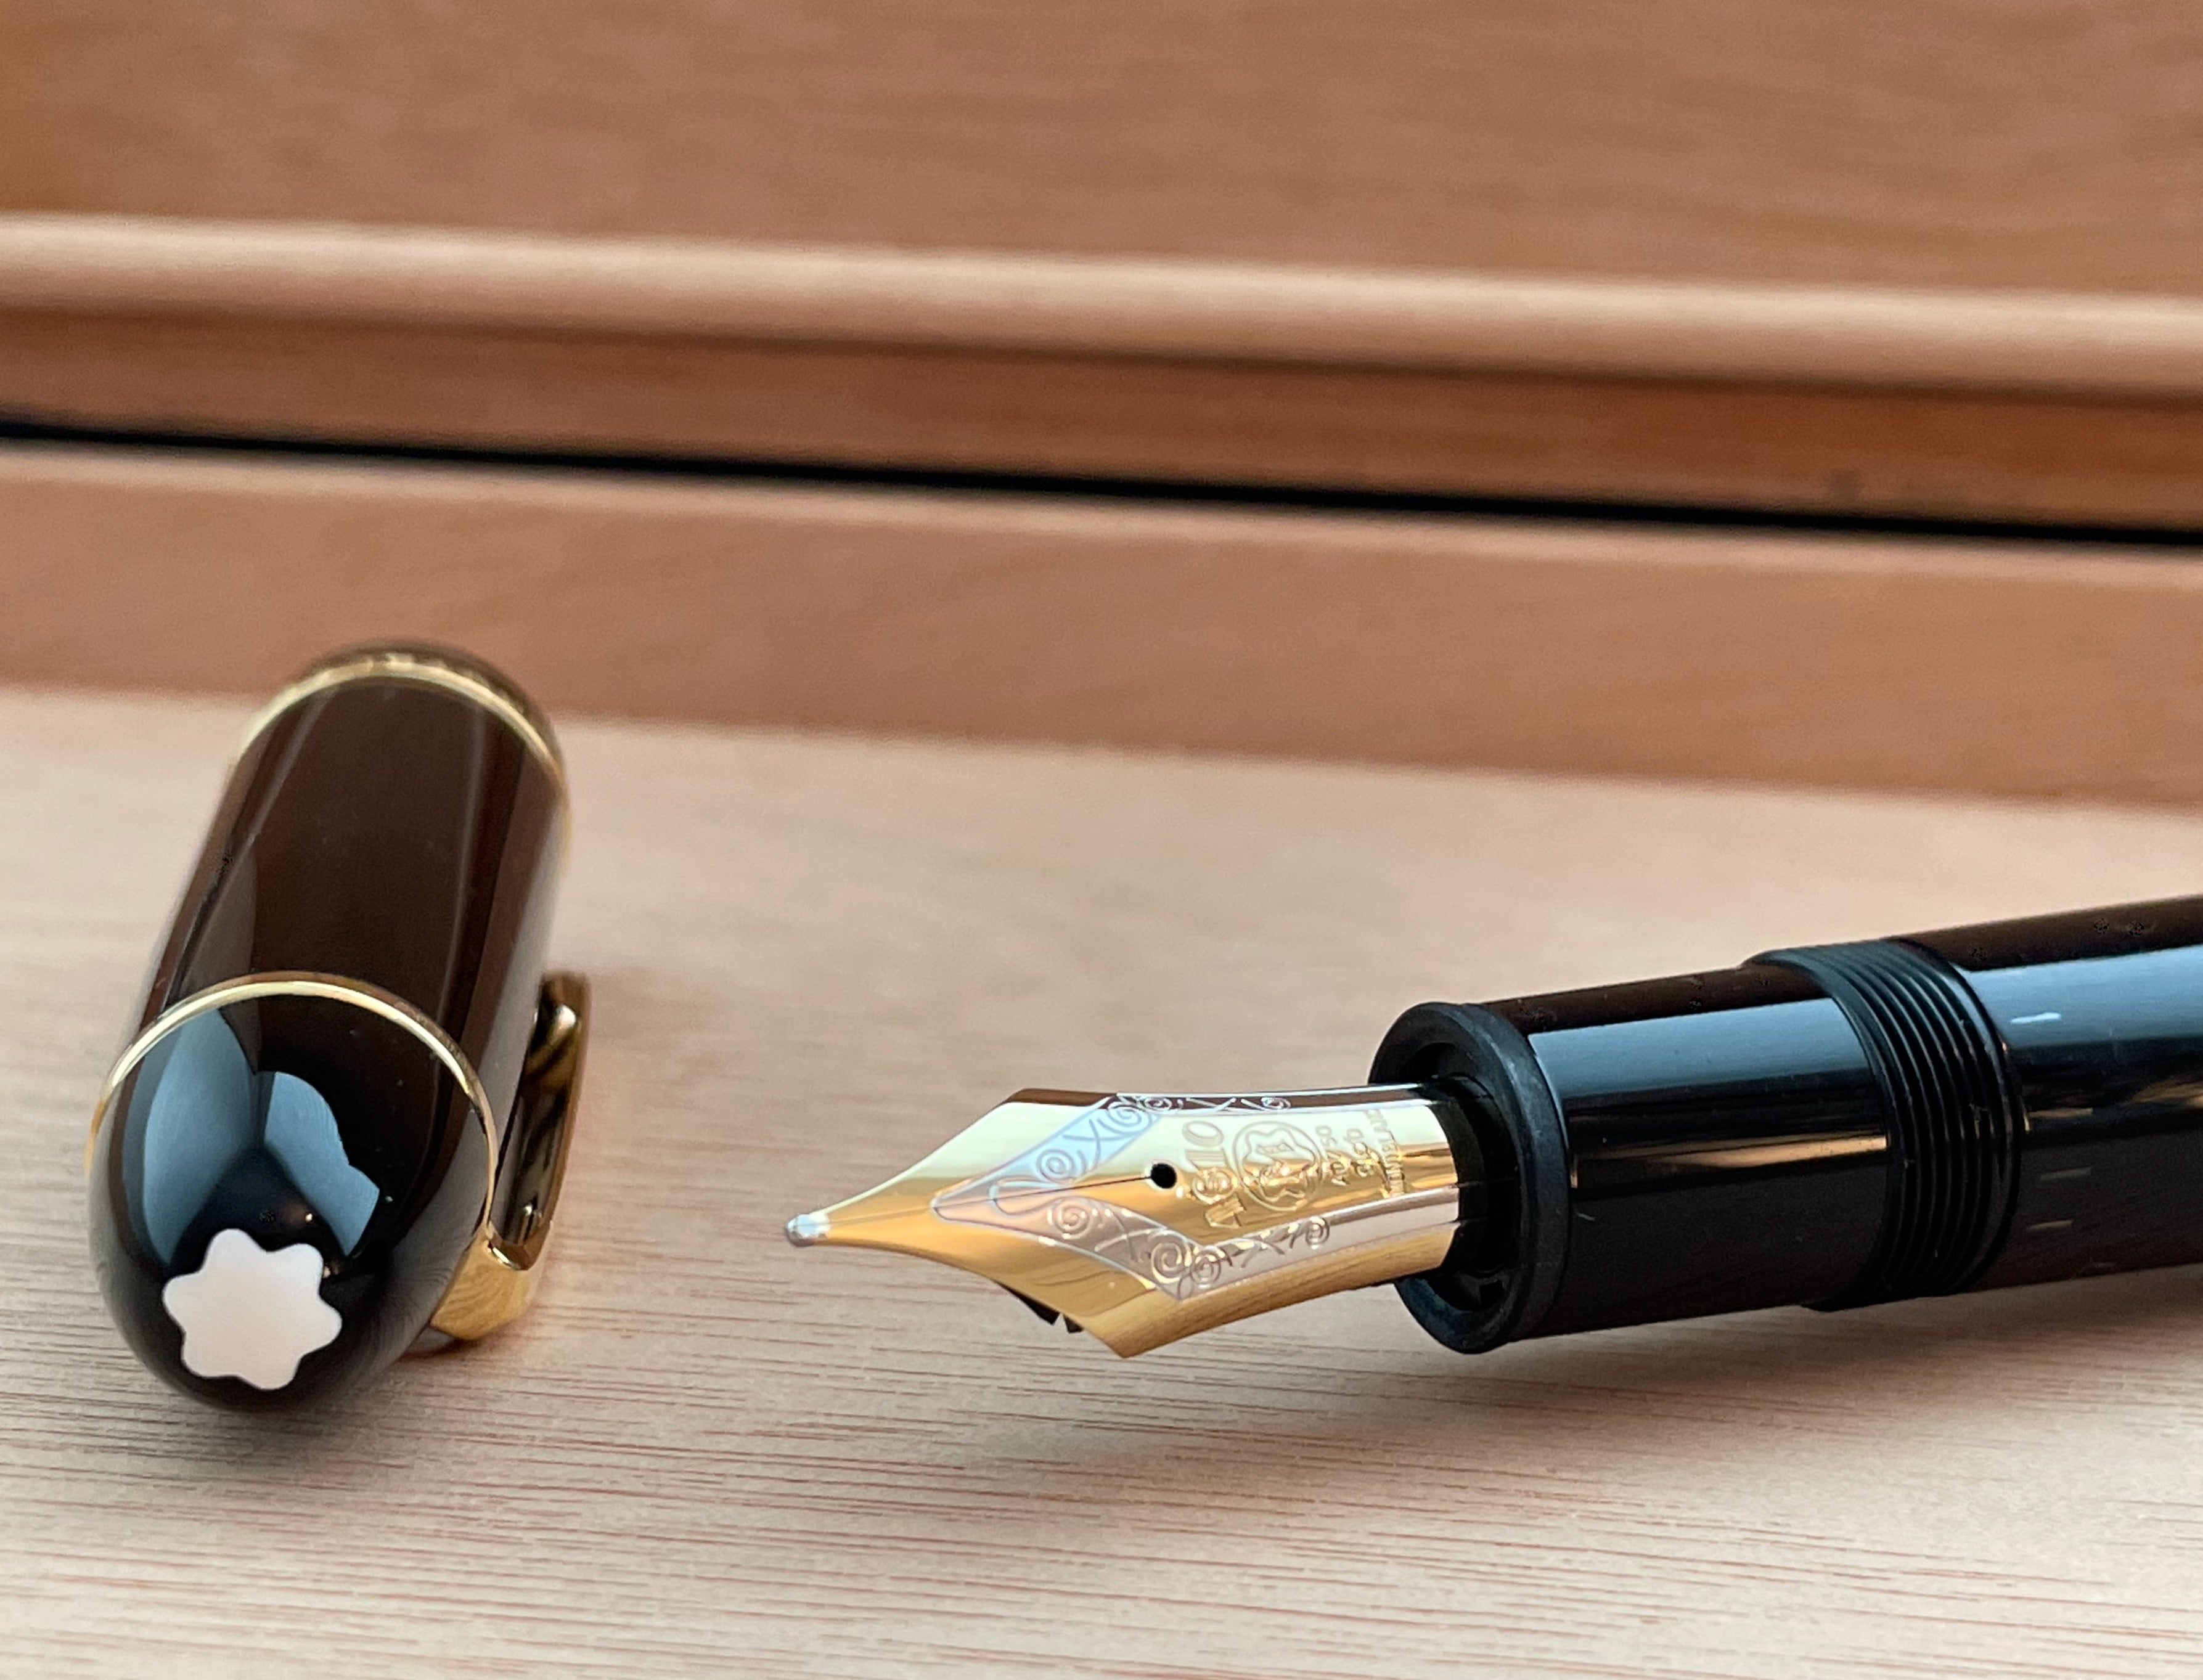 Why are Montblancs so Special? Let's Begin with Meisterstück - Pen  Boutique Ltd